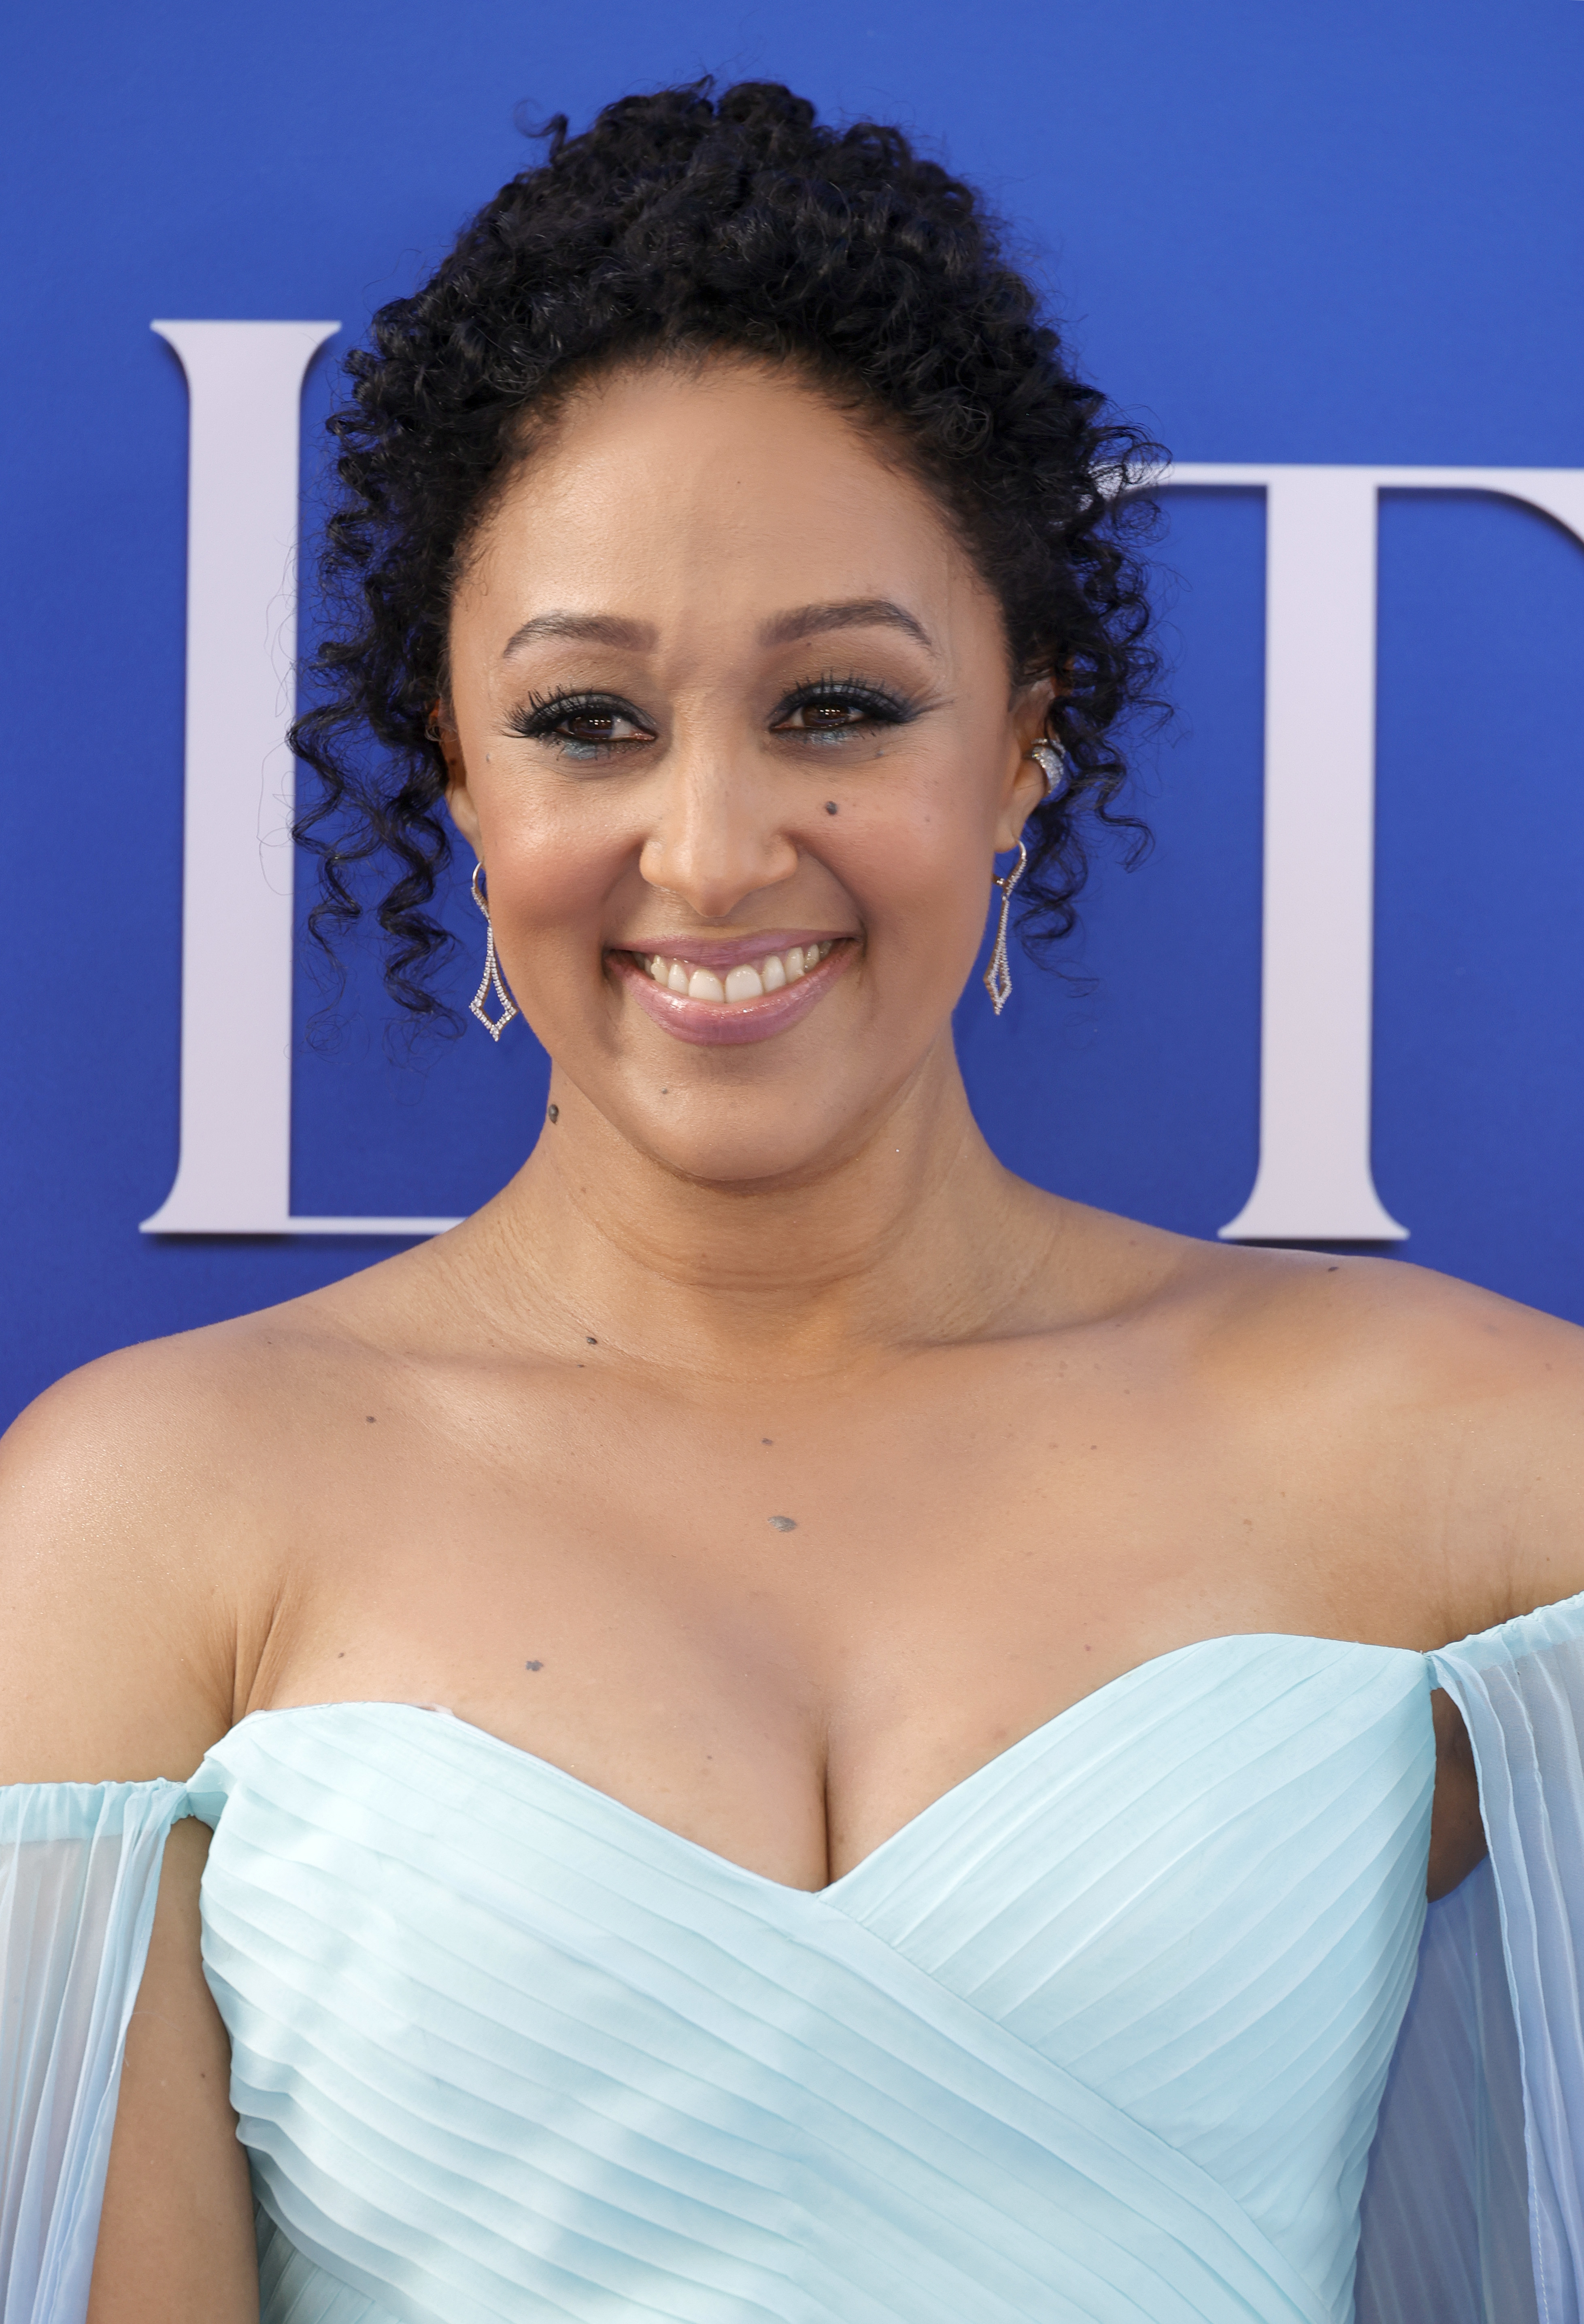 Tamera Mowry-Housley on the red carpet